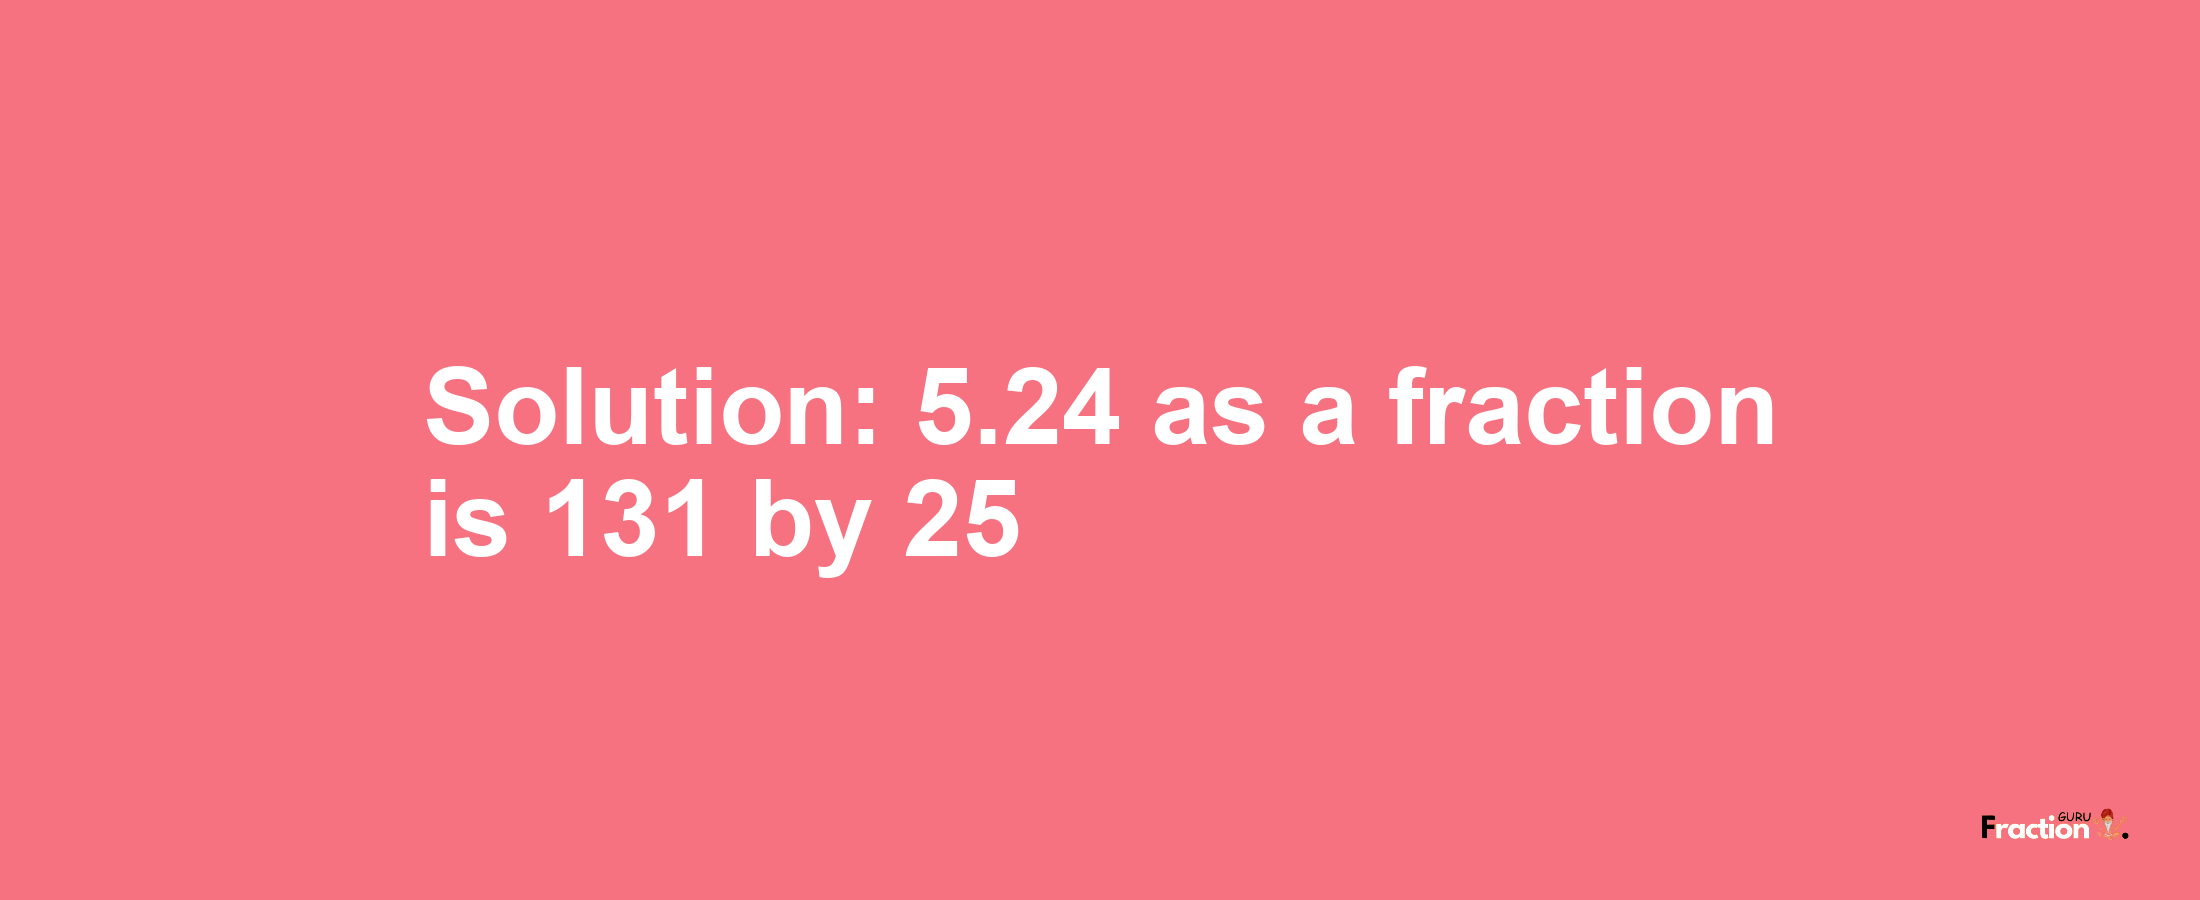 Solution:5.24 as a fraction is 131/25